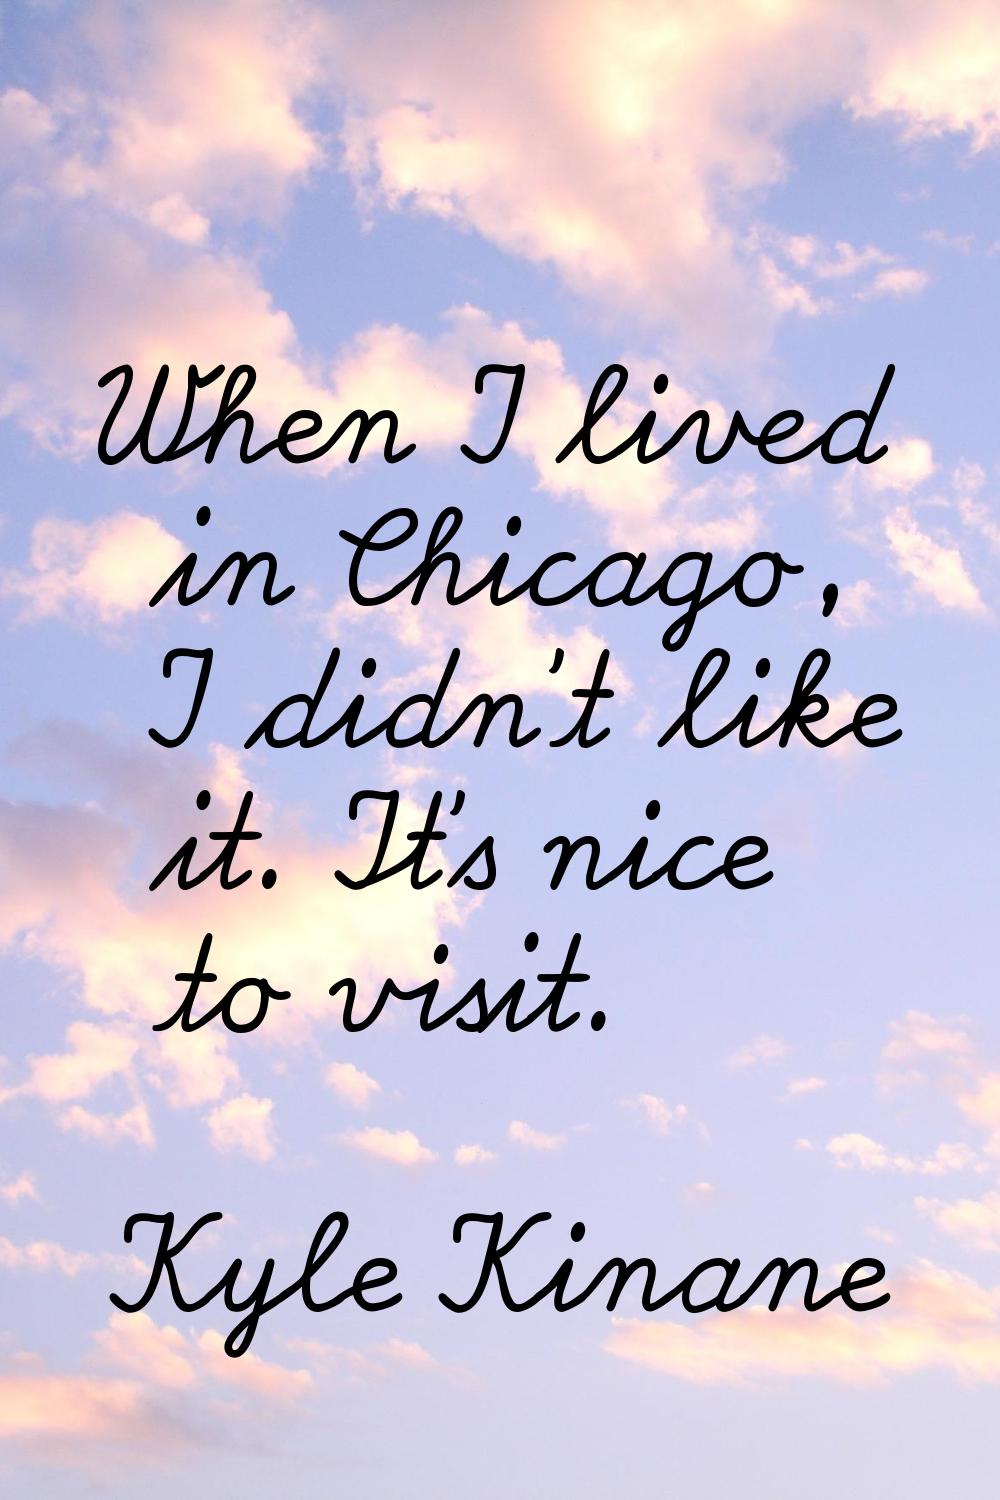 When I lived in Chicago, I didn't like it. It's nice to visit.